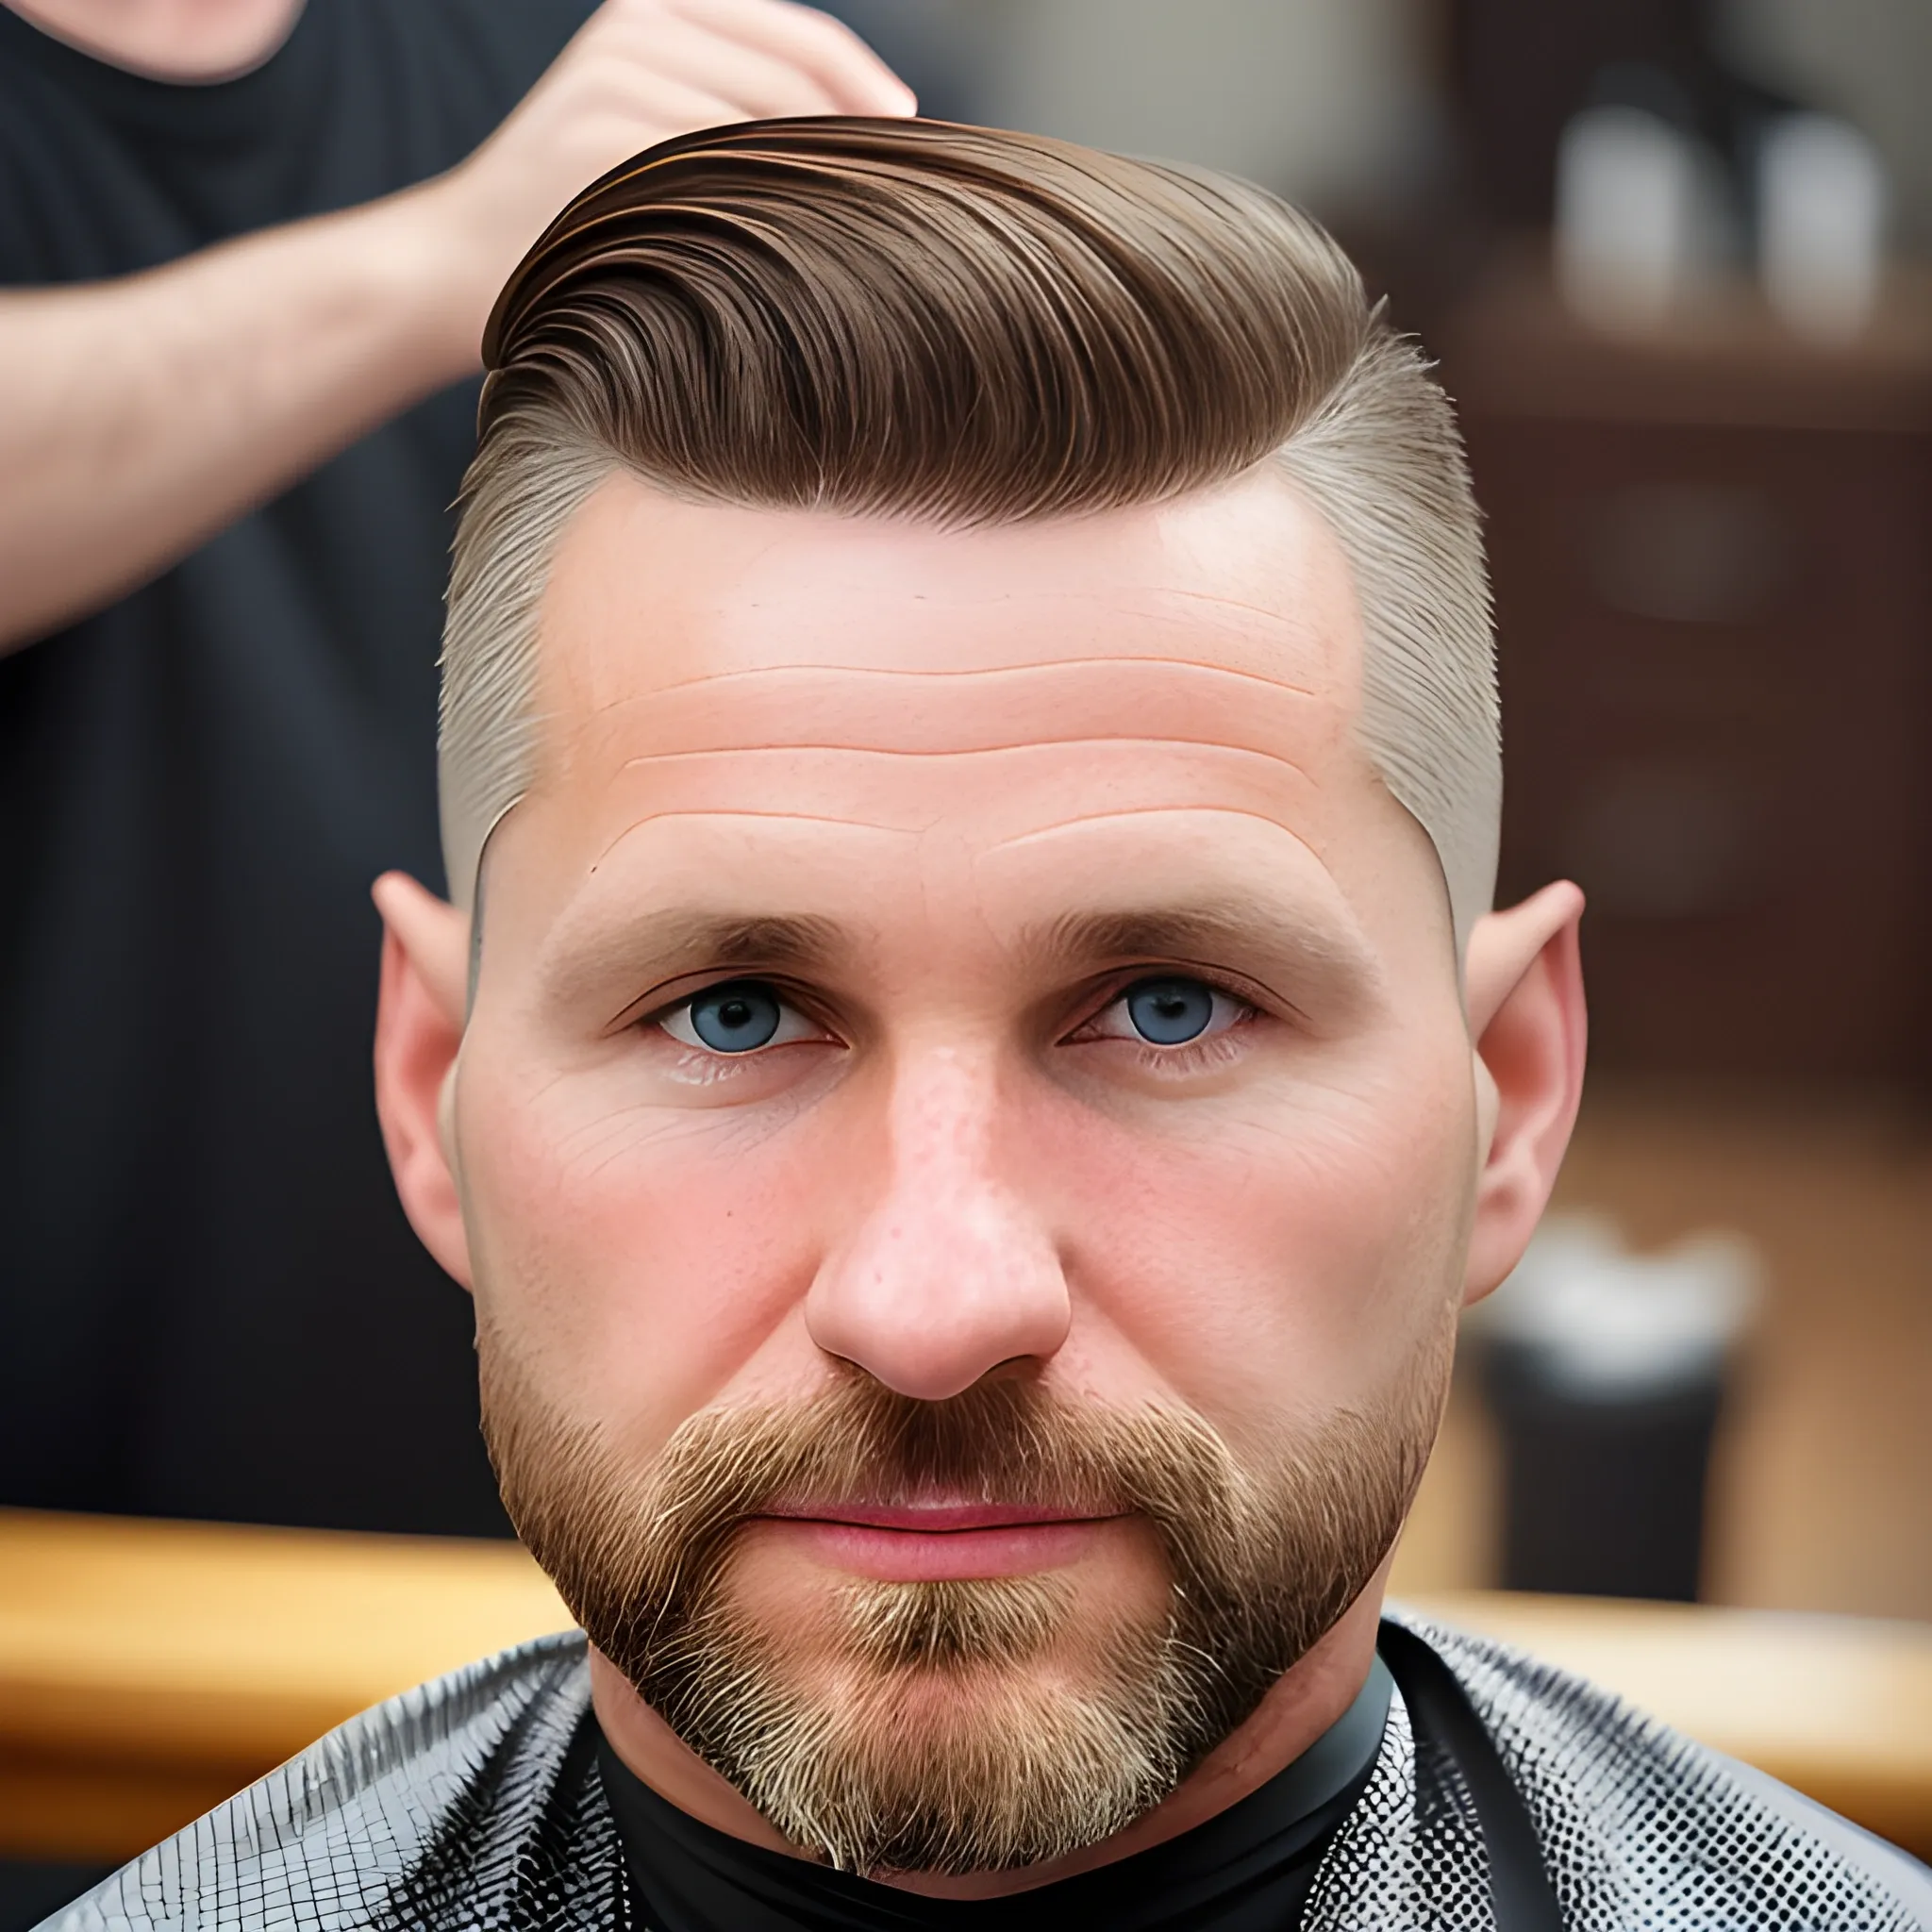 Portrait of 40 year old Caucasian male with very short brown hair coming to a peak in front with high fade for haircut with egg shaped head and no facial hair.